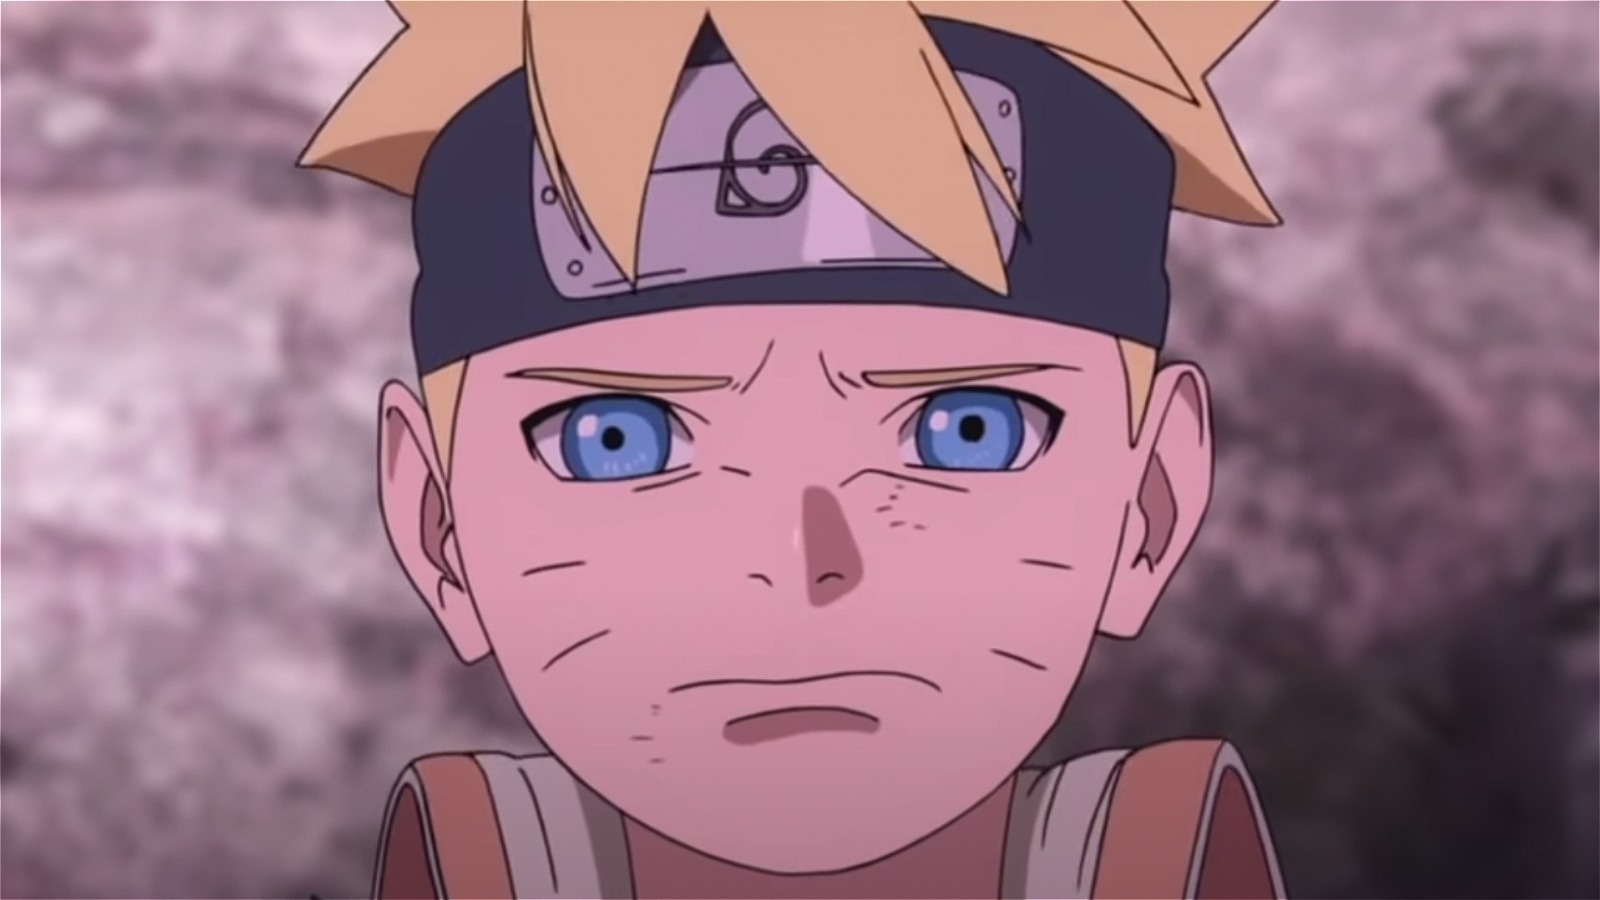 Naruto - Talking about weirdness